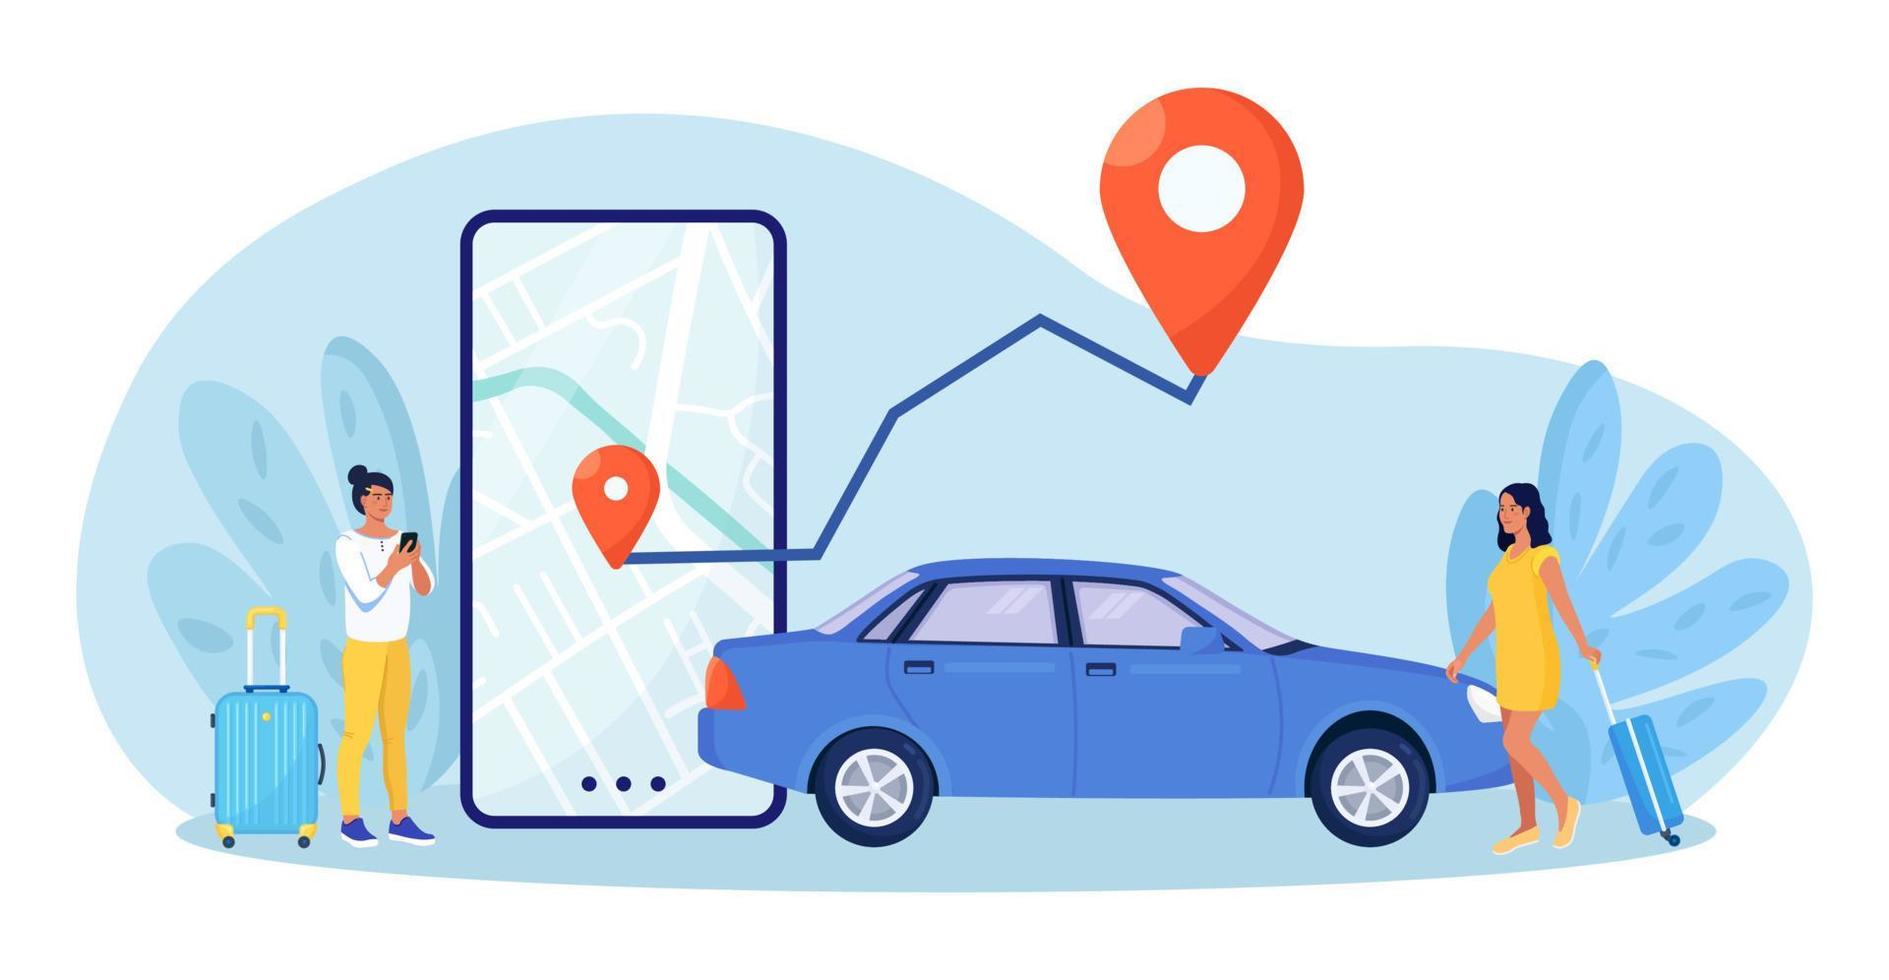 Online car rent. People using mobile application for ordering taxi cab or car sharing. Woman near smartphone screen with route and location mark on a city map vector